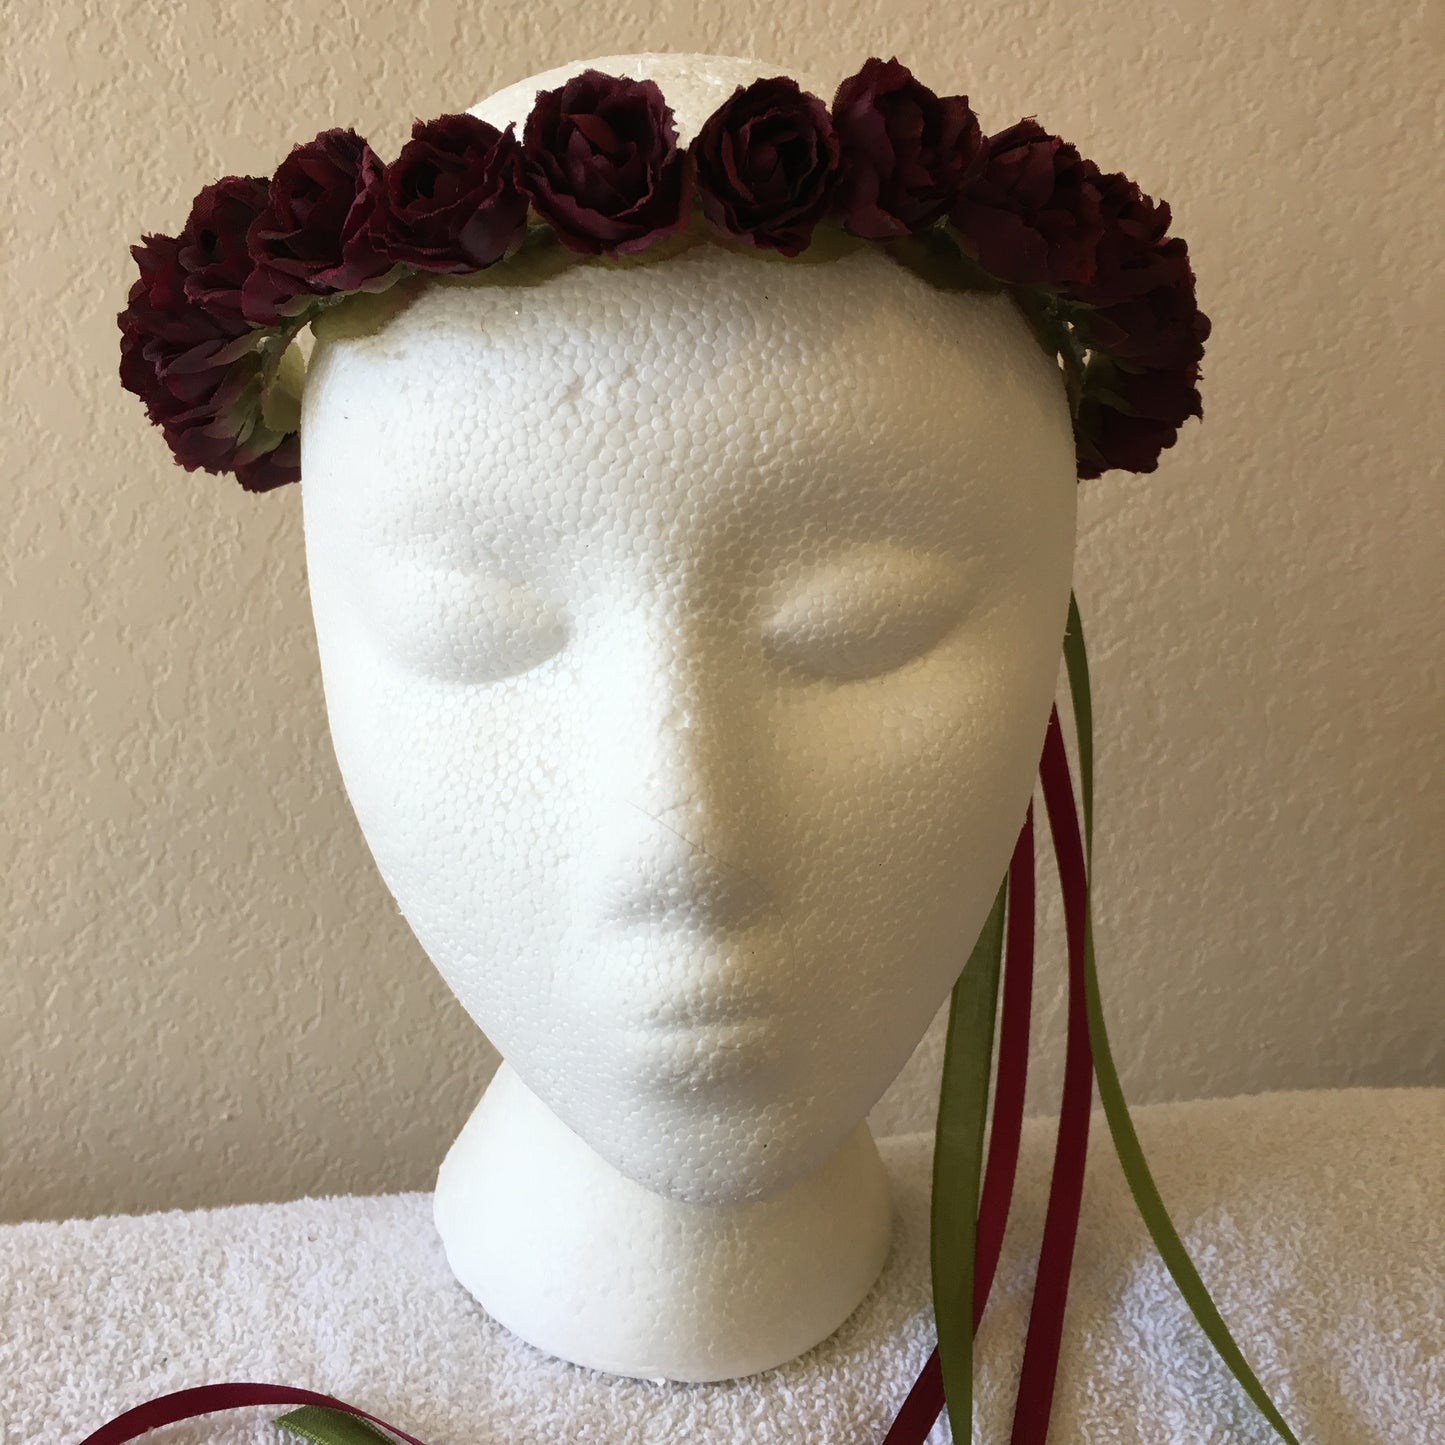 Extra Small Wreath - Burgundy roses